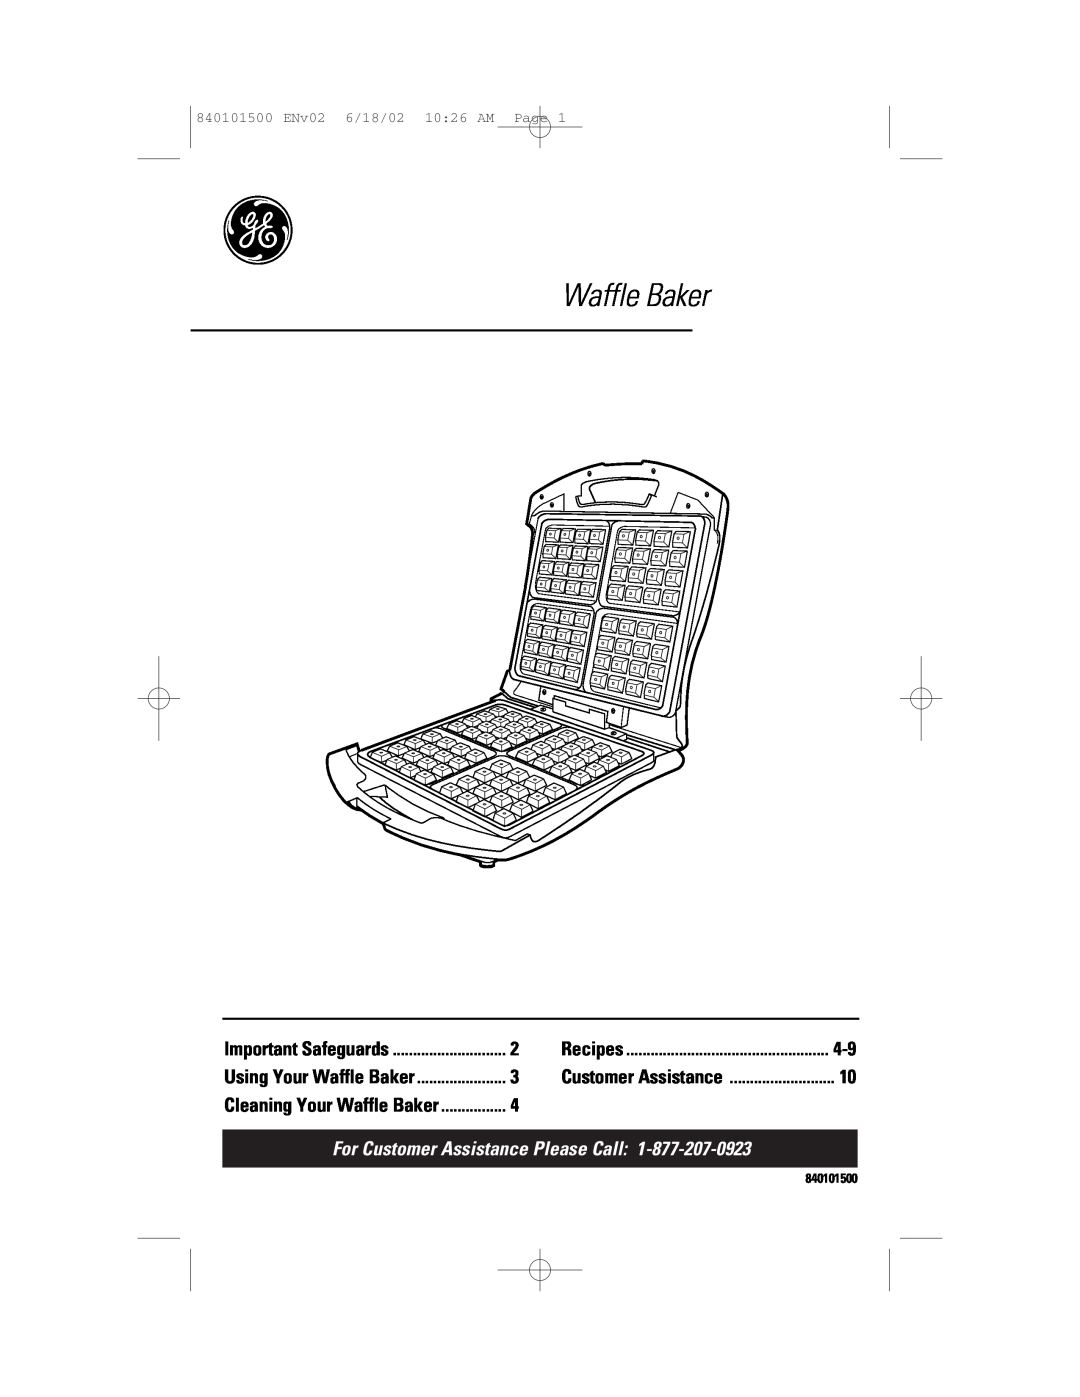 GE 840101500 manual Waffle Baker, For Customer Assistance Please Call, Important Safeguards, Recipes 